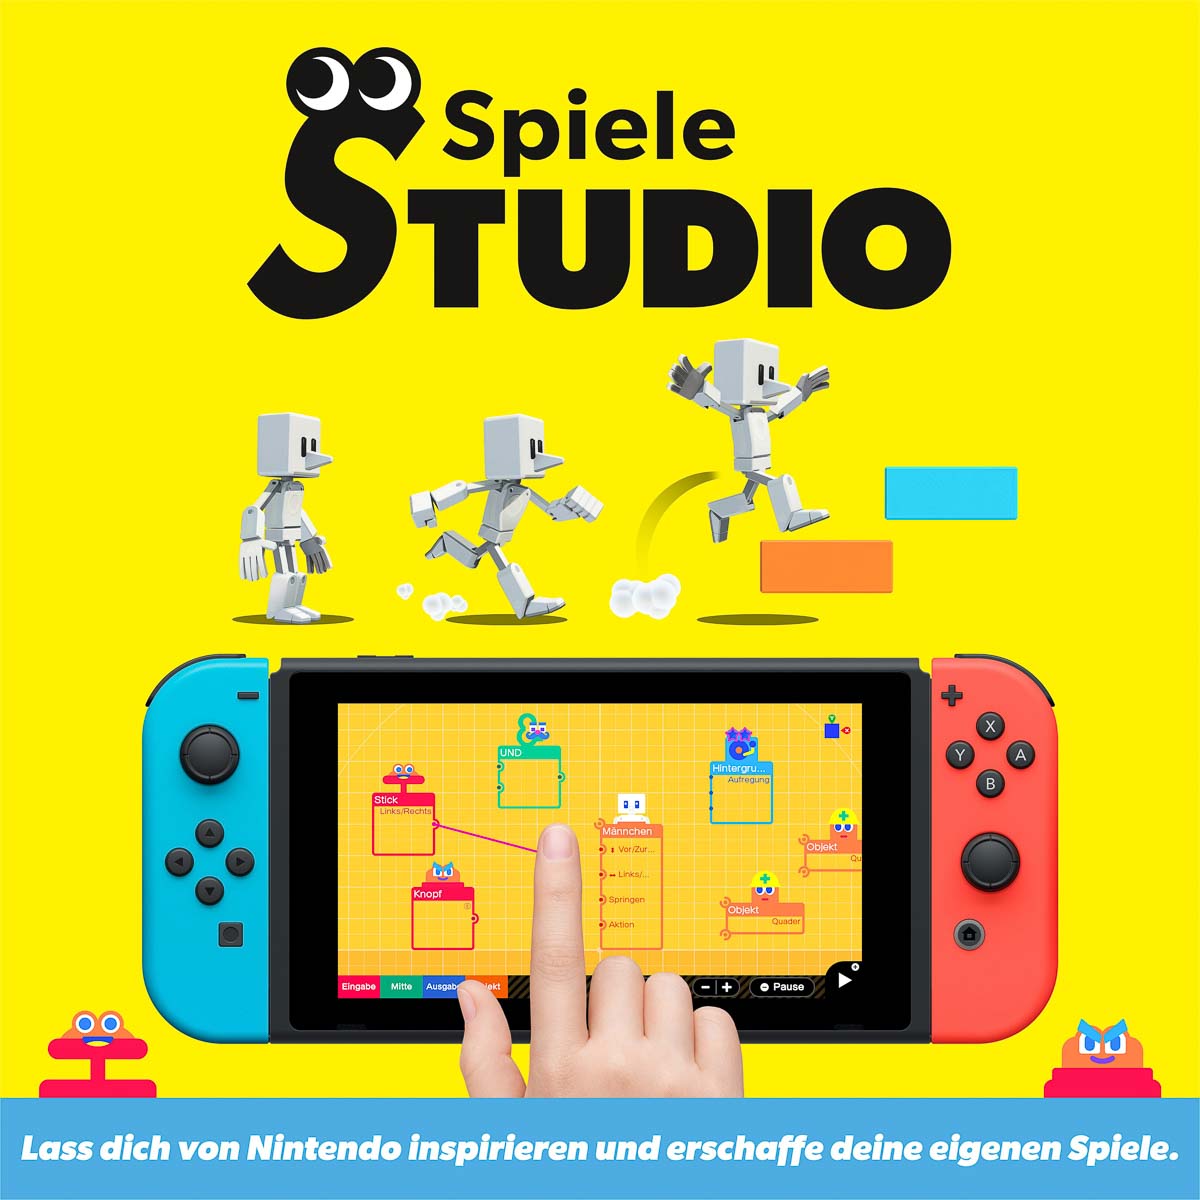 Featured image for “Spielestudio”